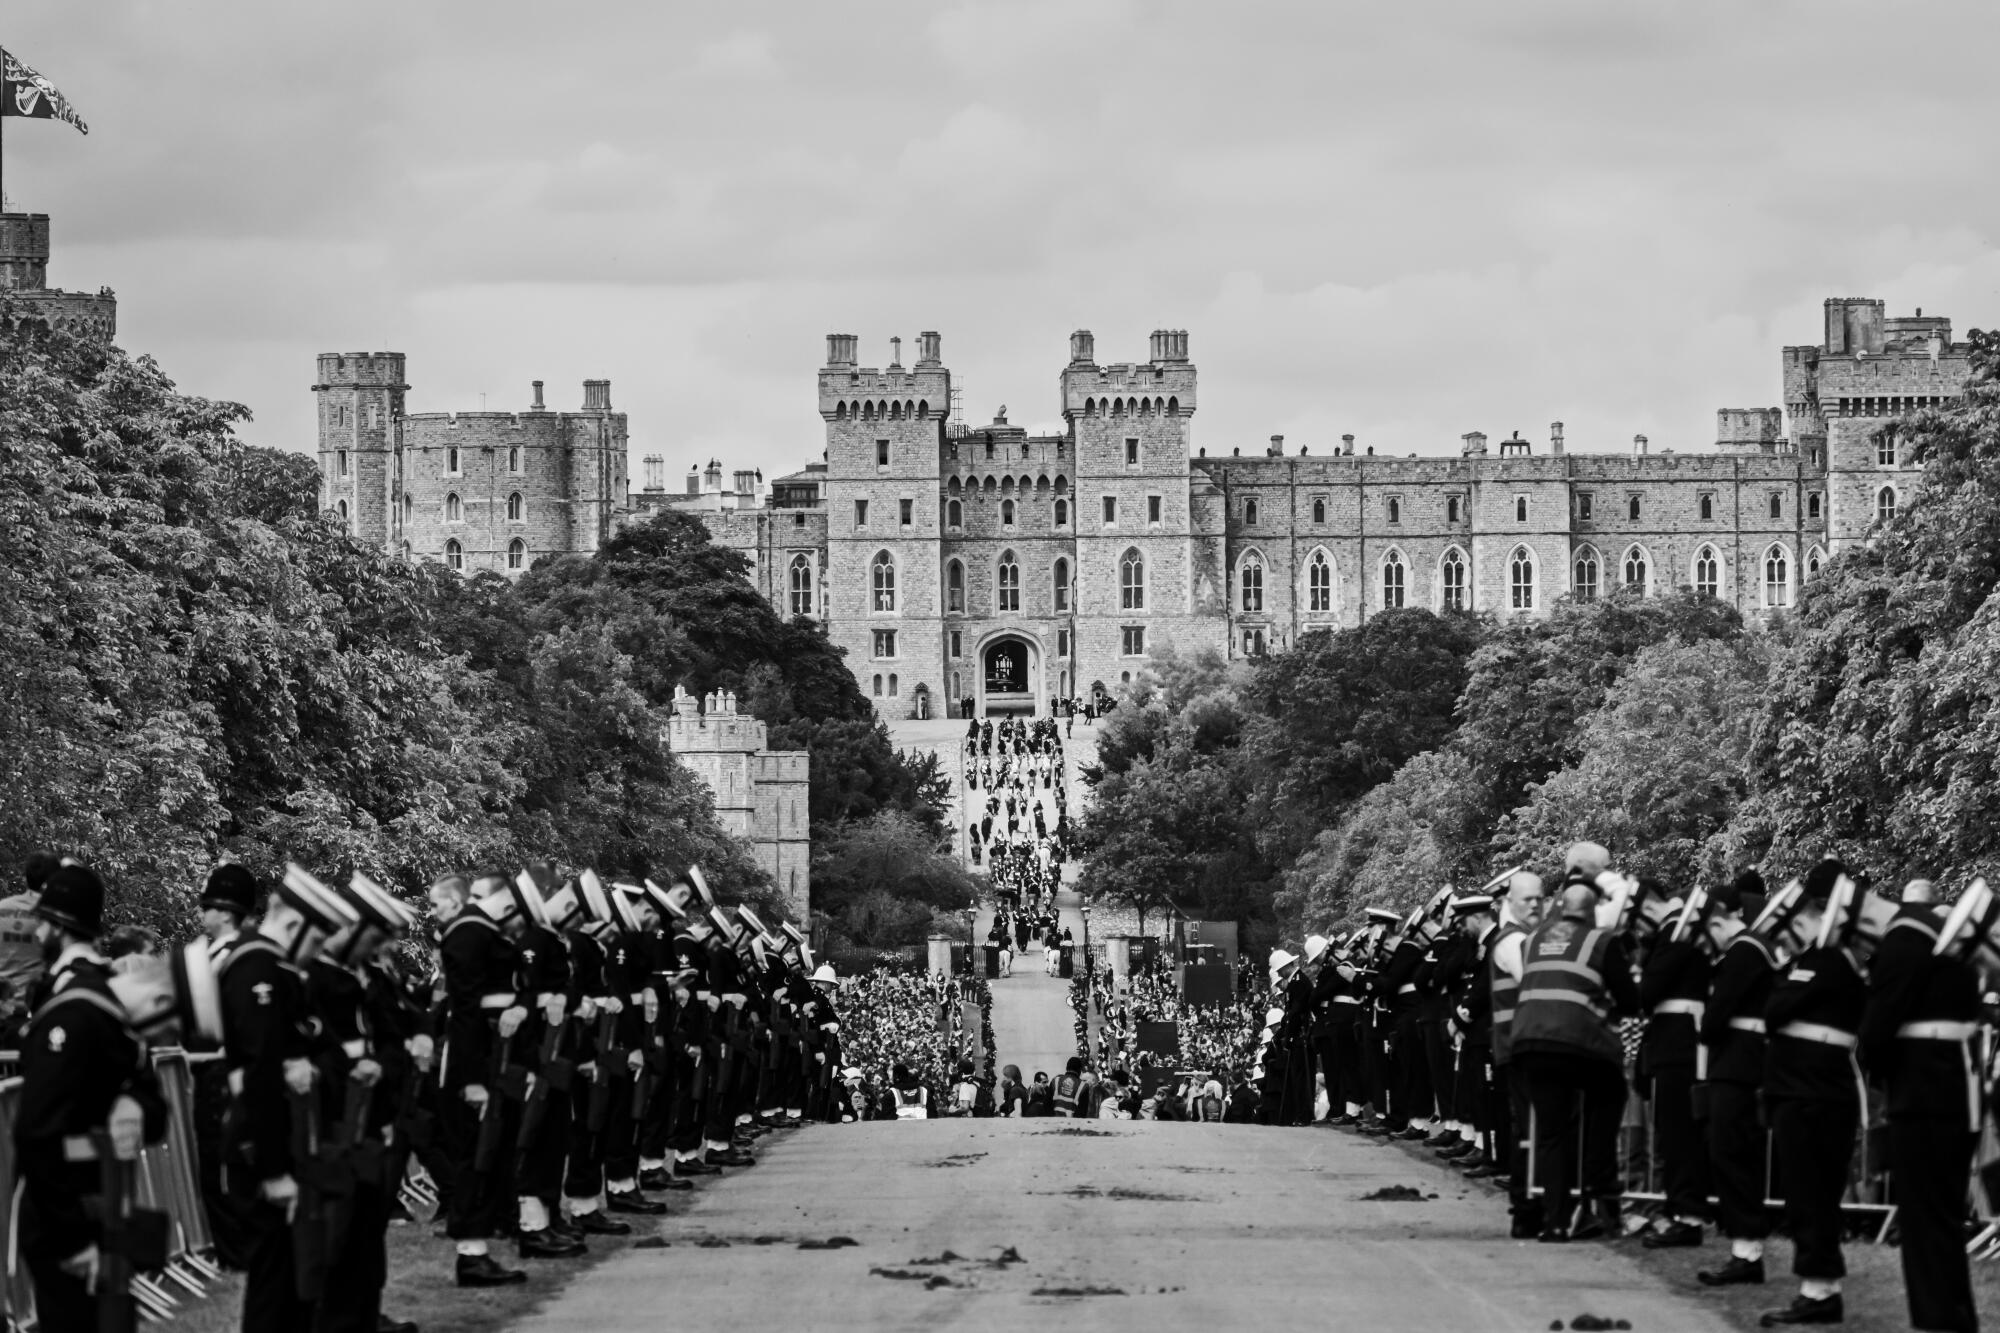 The road leading to Windsor Castle, which will be the final resting place for Queen Elizabeth II.